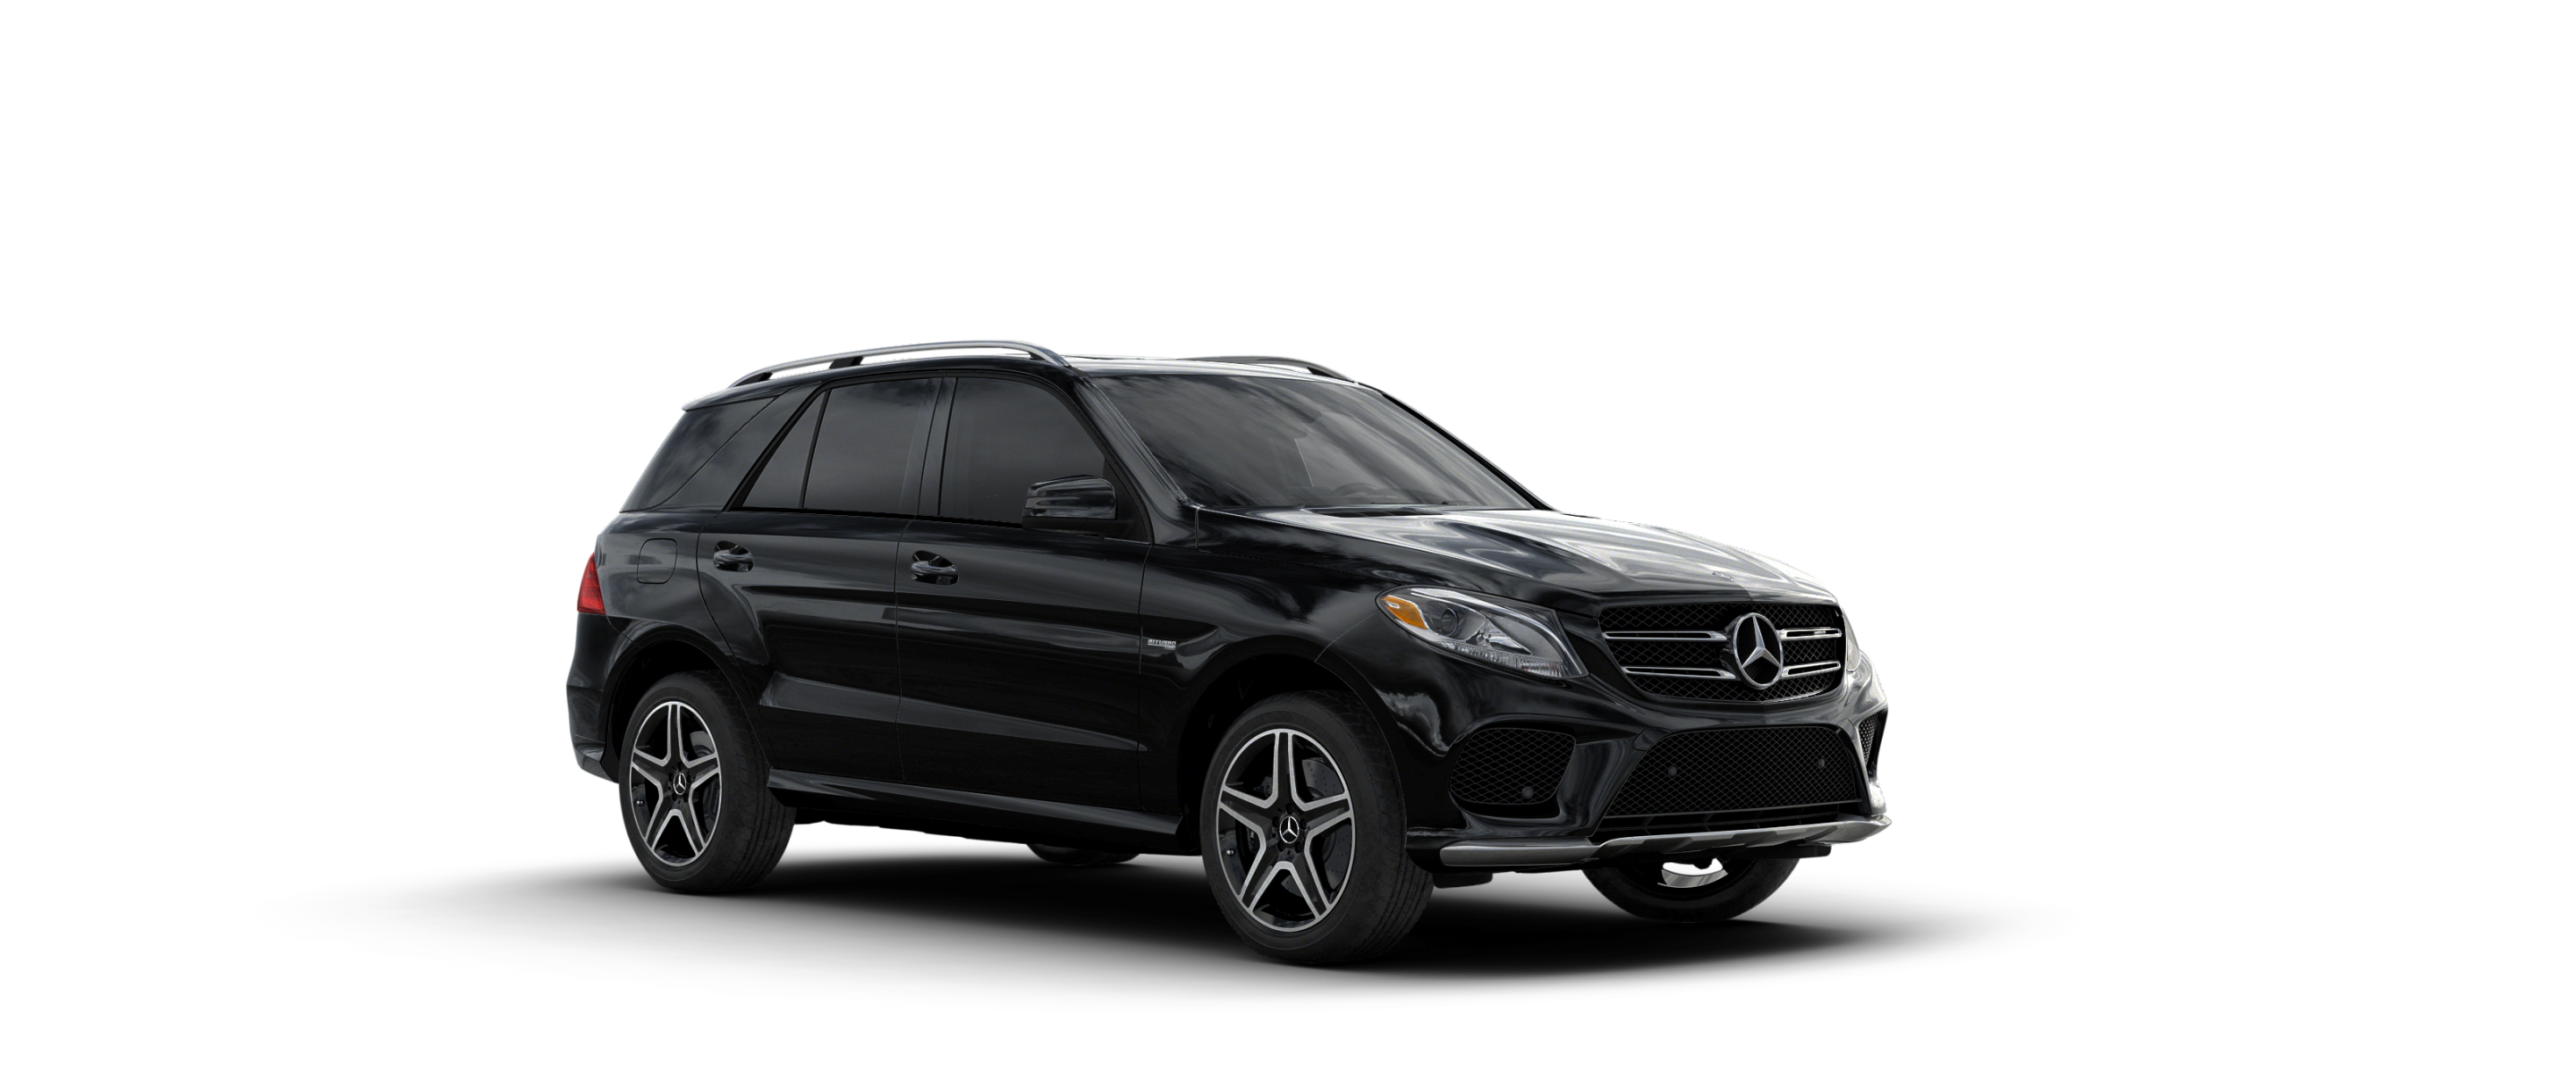 Mercedes Benz Amg Gle 43 Lease Prices Buy Incentives